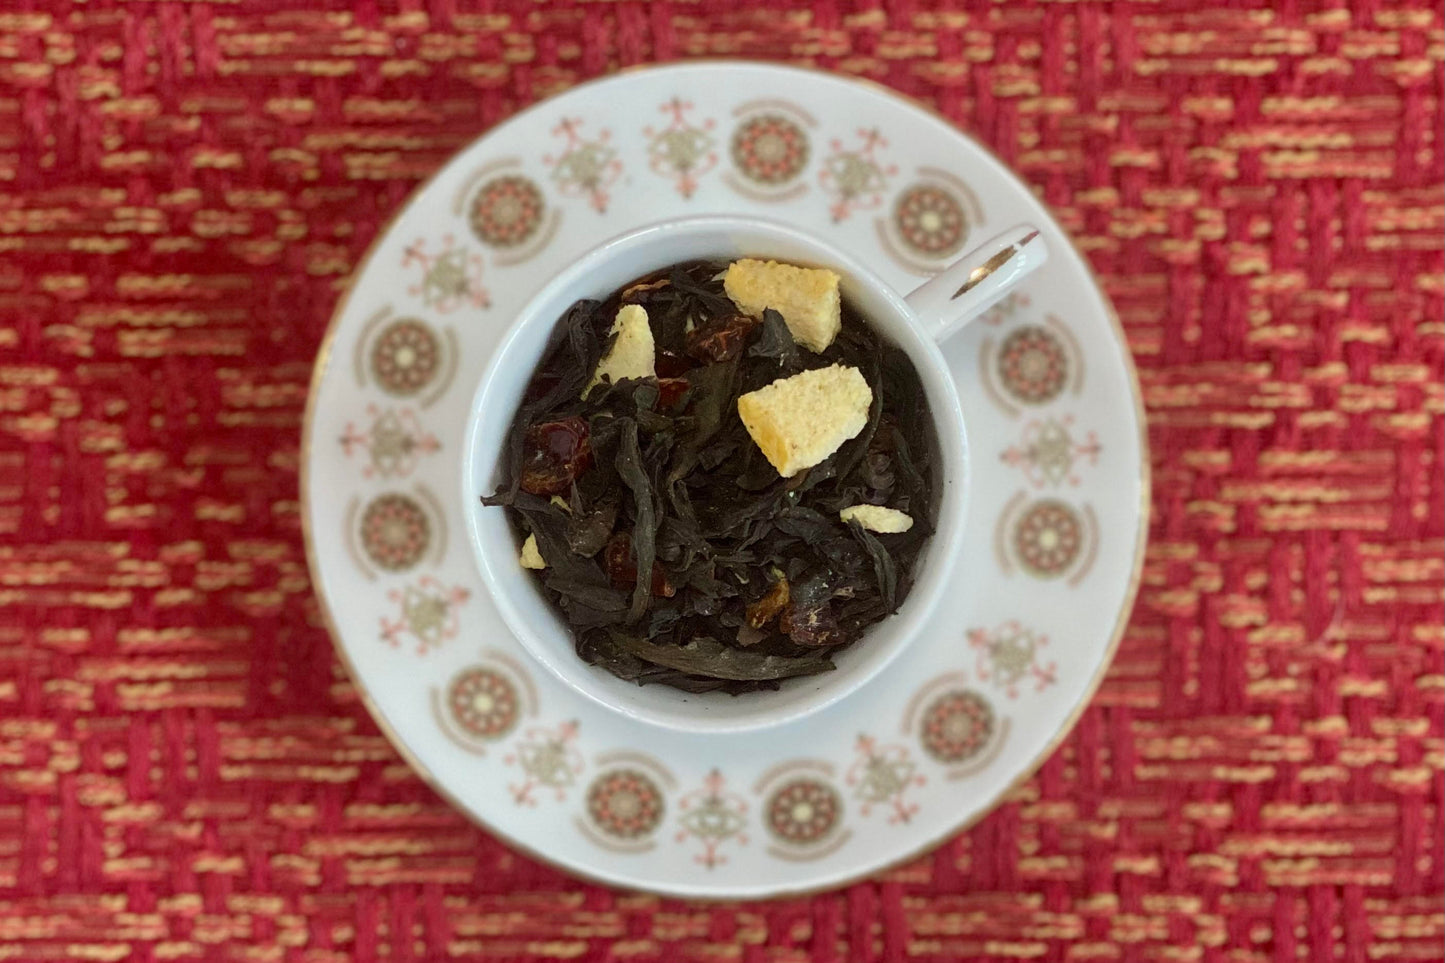 teacup full of dark oolong leaves and peach pieces